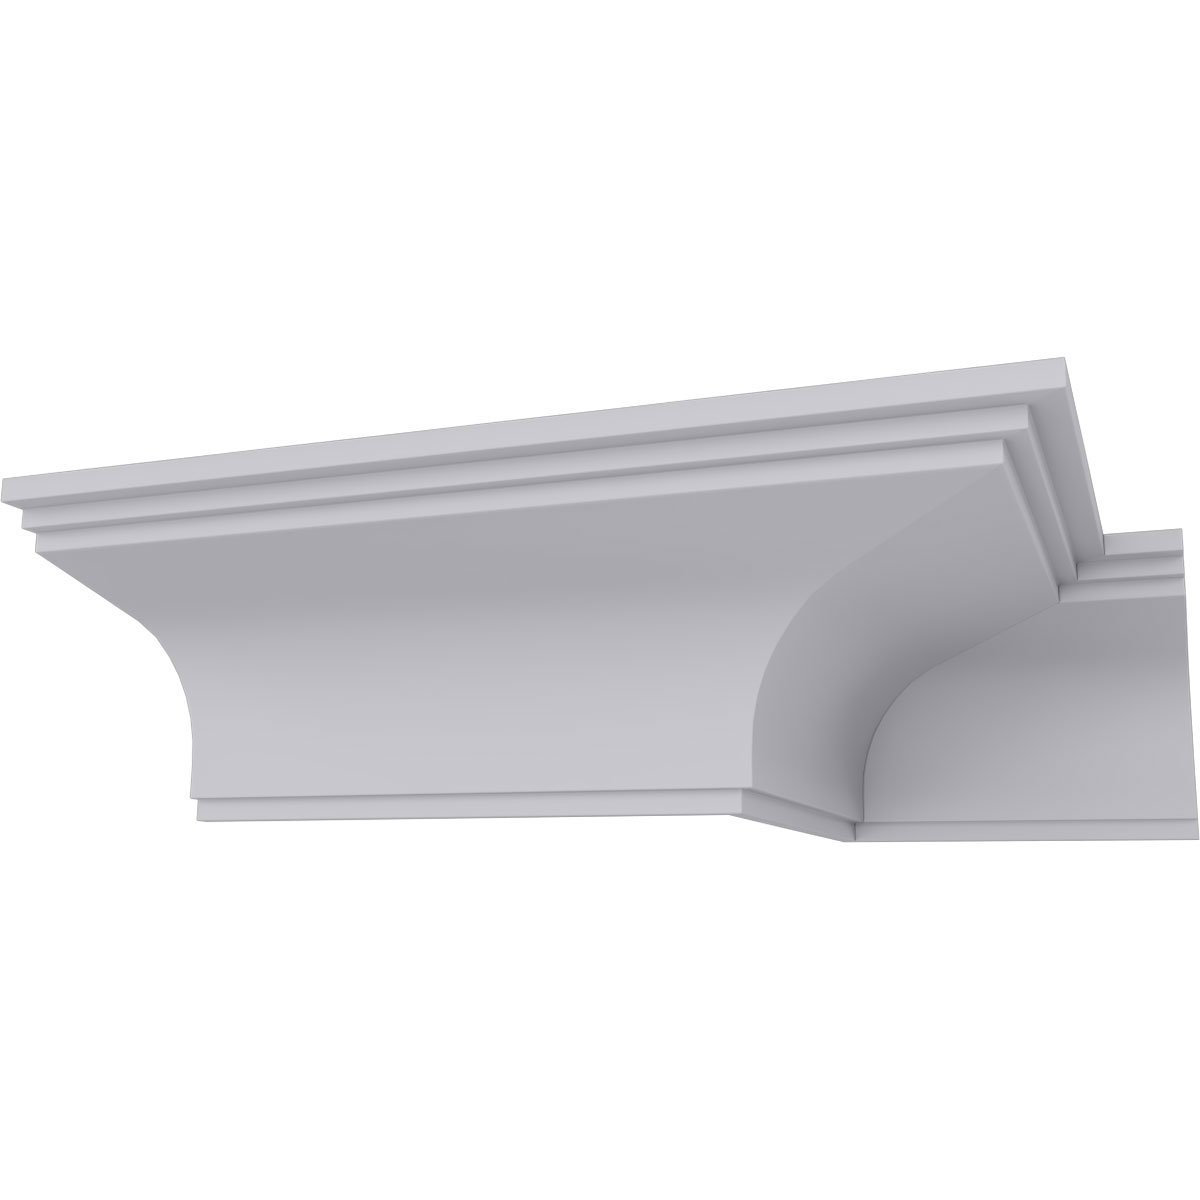 Pack of 3 Designers Edge Millwork 4-1/8 Face x 3 High x 3 Projection Primed White Polyurethane Crown Moulding 94 Inch Length